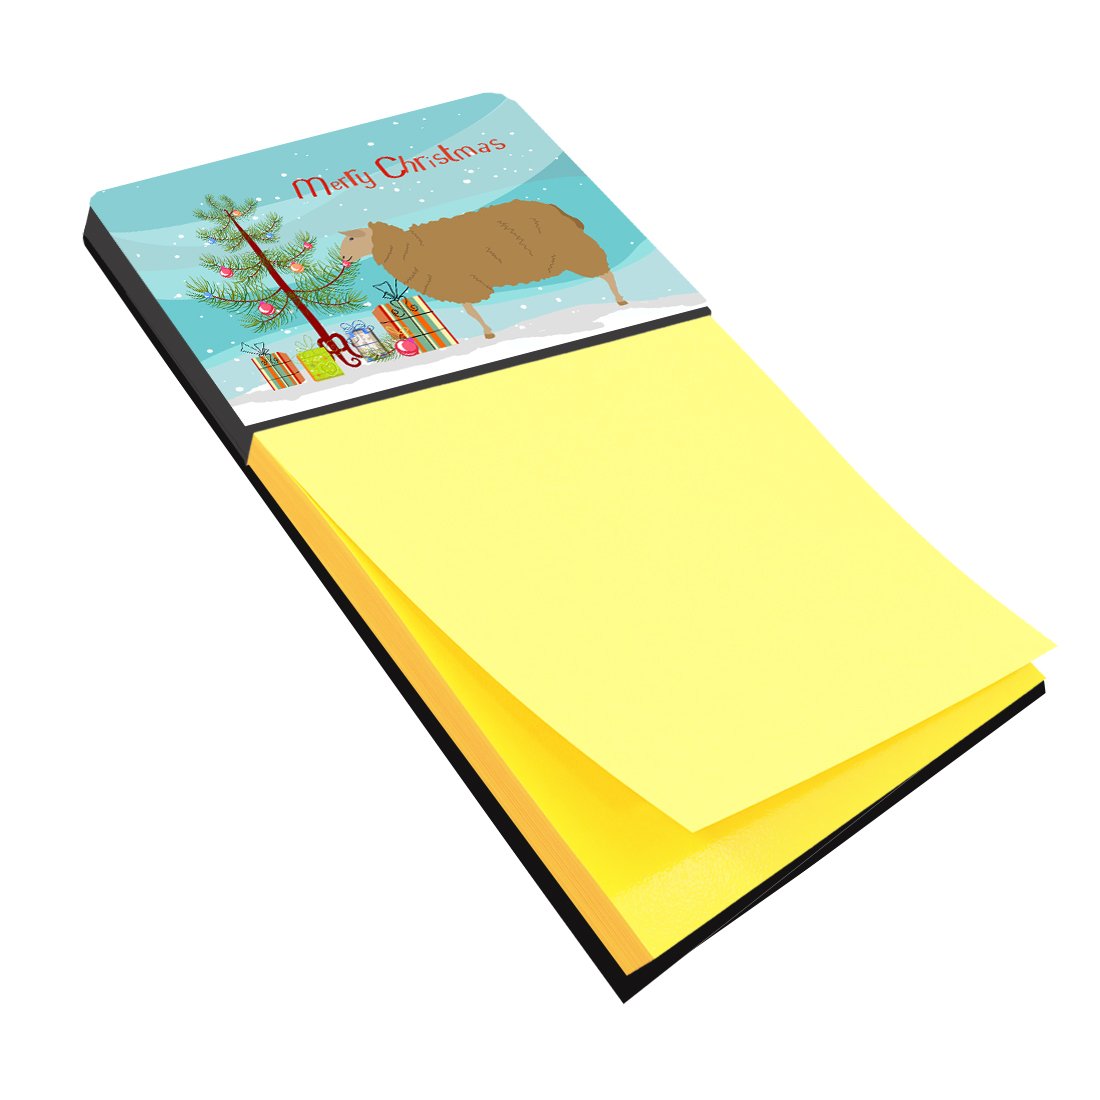 East Friesian Sheep Christmas Sticky Note Holder BB9344SN by Caroline's Treasures